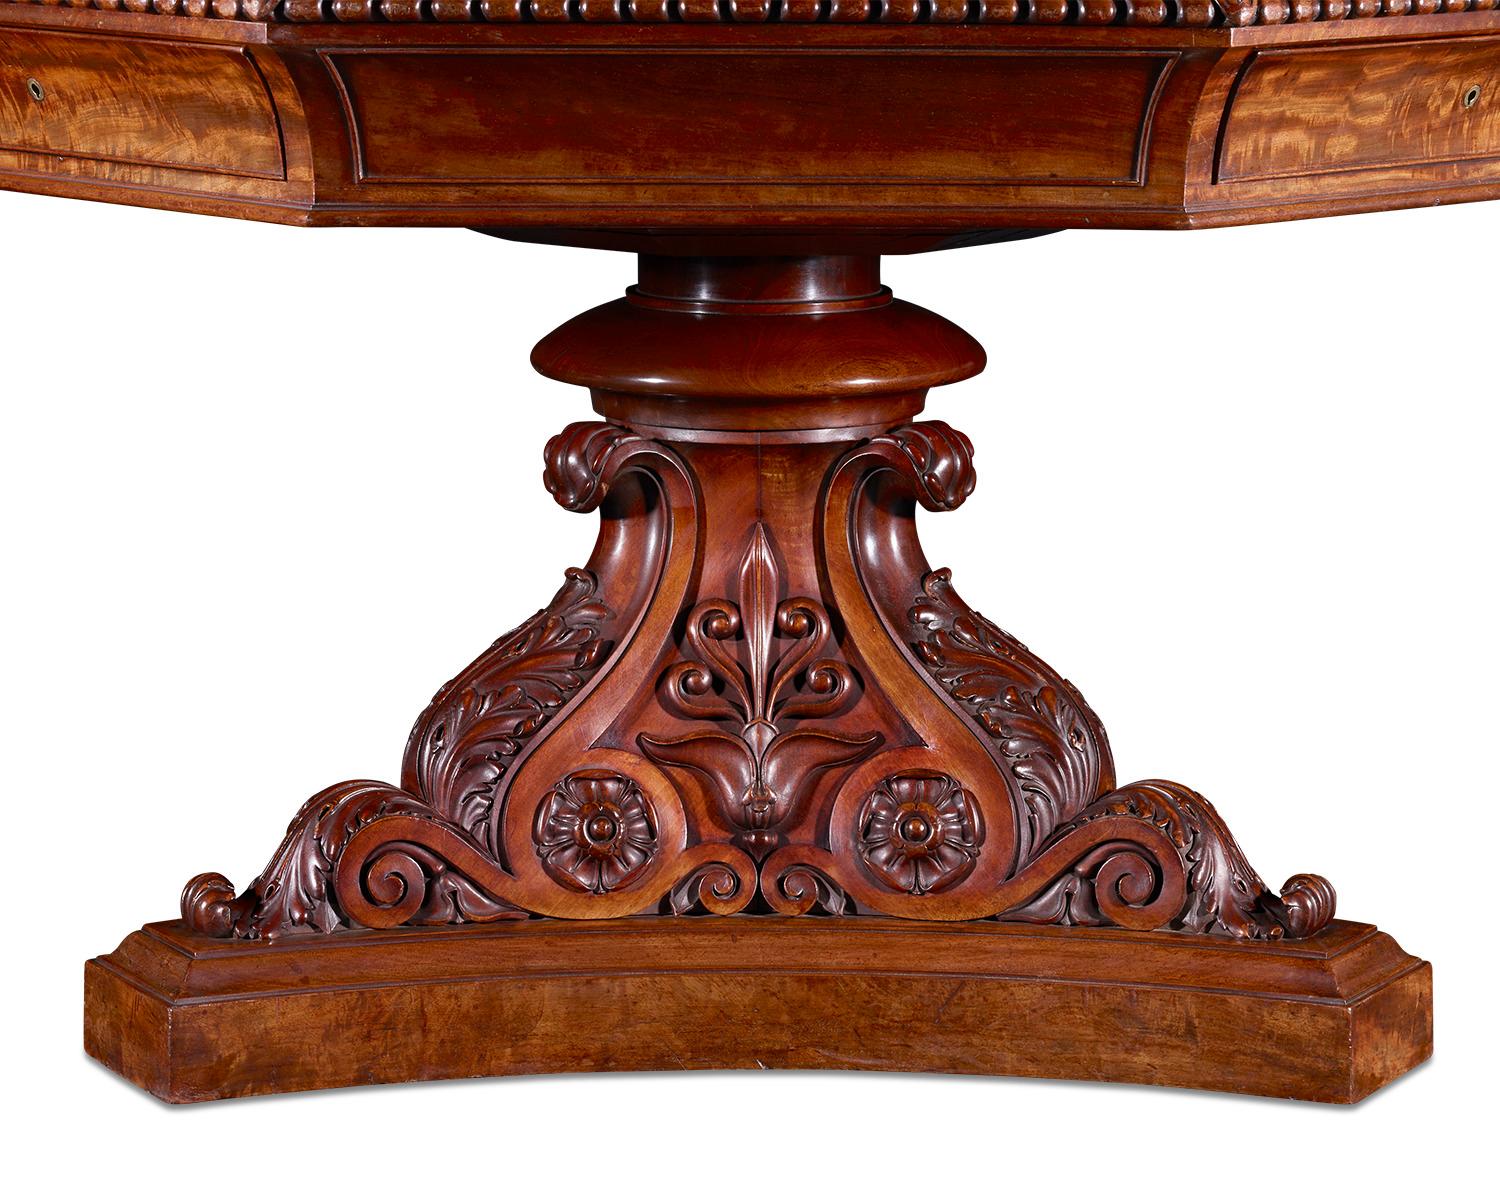 Almost certainly crafted by the legendary Gillows of Lancaster and London, this monumental mahogany library table is richly decorated. Its striking octagonal design features a rotating top covered in tooled leather and a pyramidal base adorned with